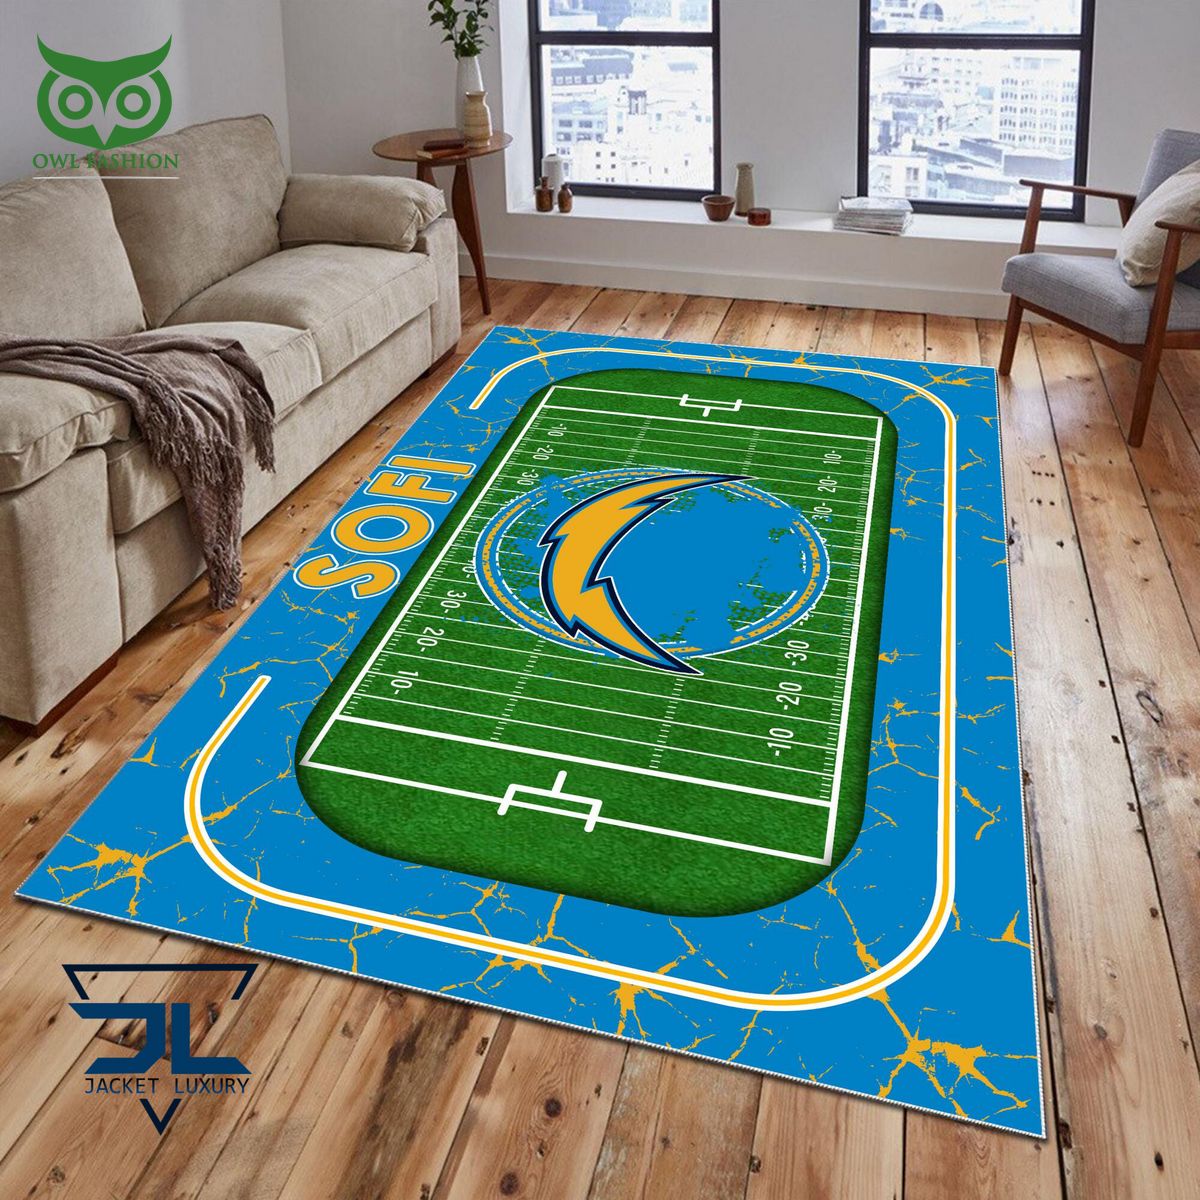 los angeles chargers nfl national football league premium carpet rug 1 yjPh7